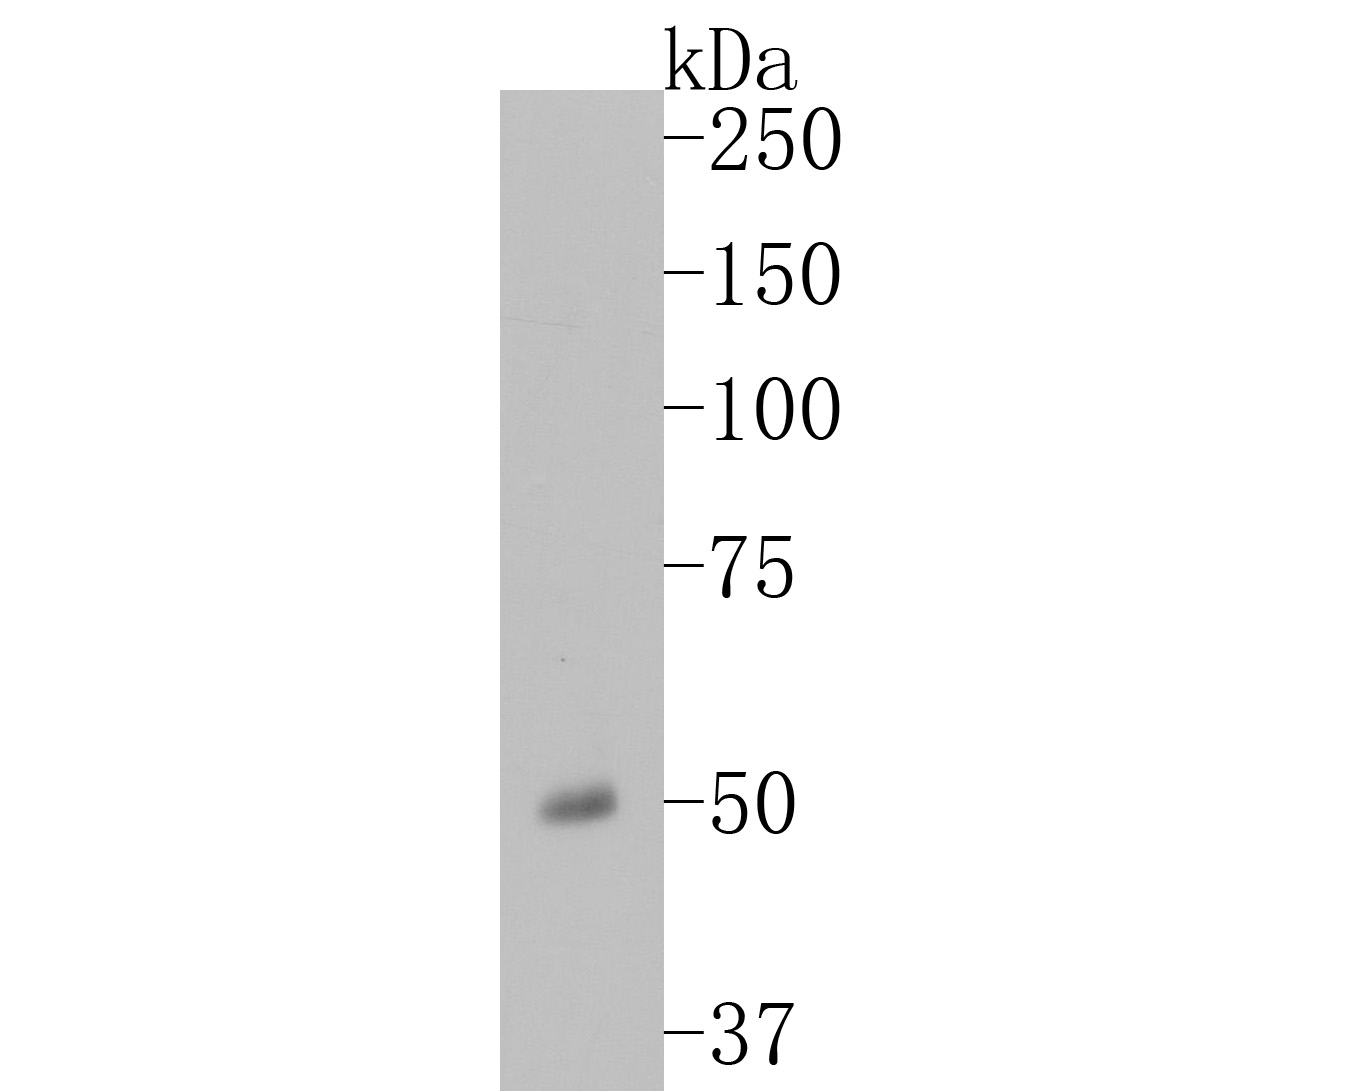 Western blot analysis of ETN1 on Human plasma lysates. Proteins were transferred to a PVDF membrane and blocked with 5% BSA in PBS for 1 hour at room temperature. The primary antibody (ER1902-23, 1/500) was used in 5% BSA at room temperature for 2 hours. Goat Anti-Rabbit IgG - HRP Secondary Antibody (HA1001) at 1:5,000 dilution was used for 1 hour at room temperature.